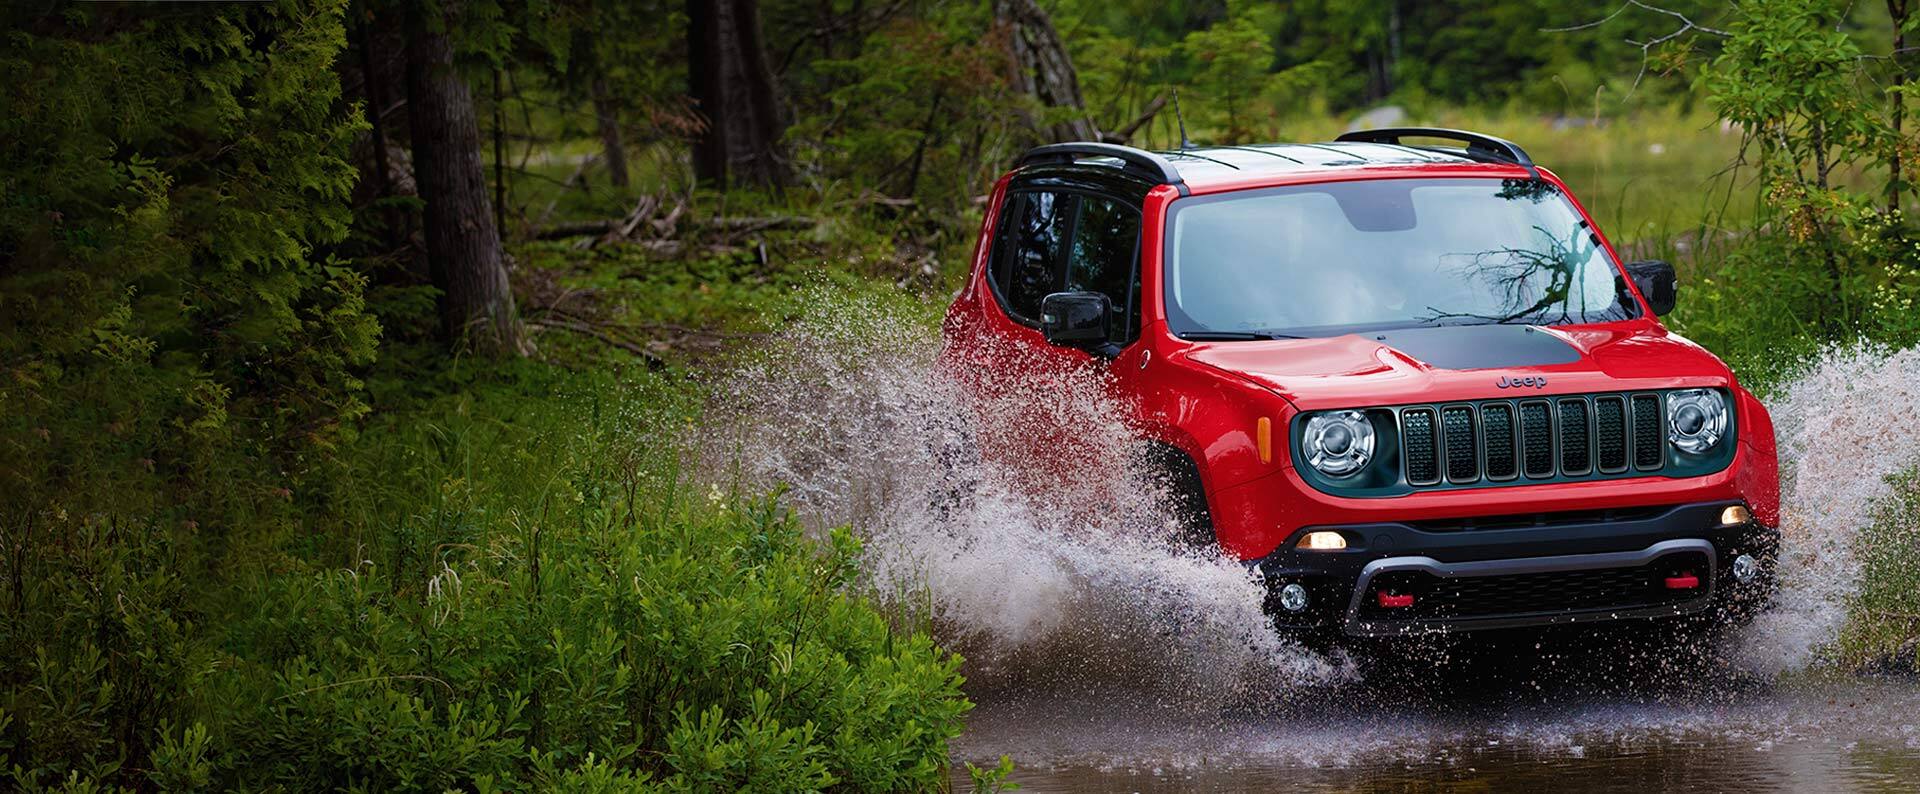 The 2022 Jeep Renegade Trailhawk being driven through a river with water splashing up on either side.